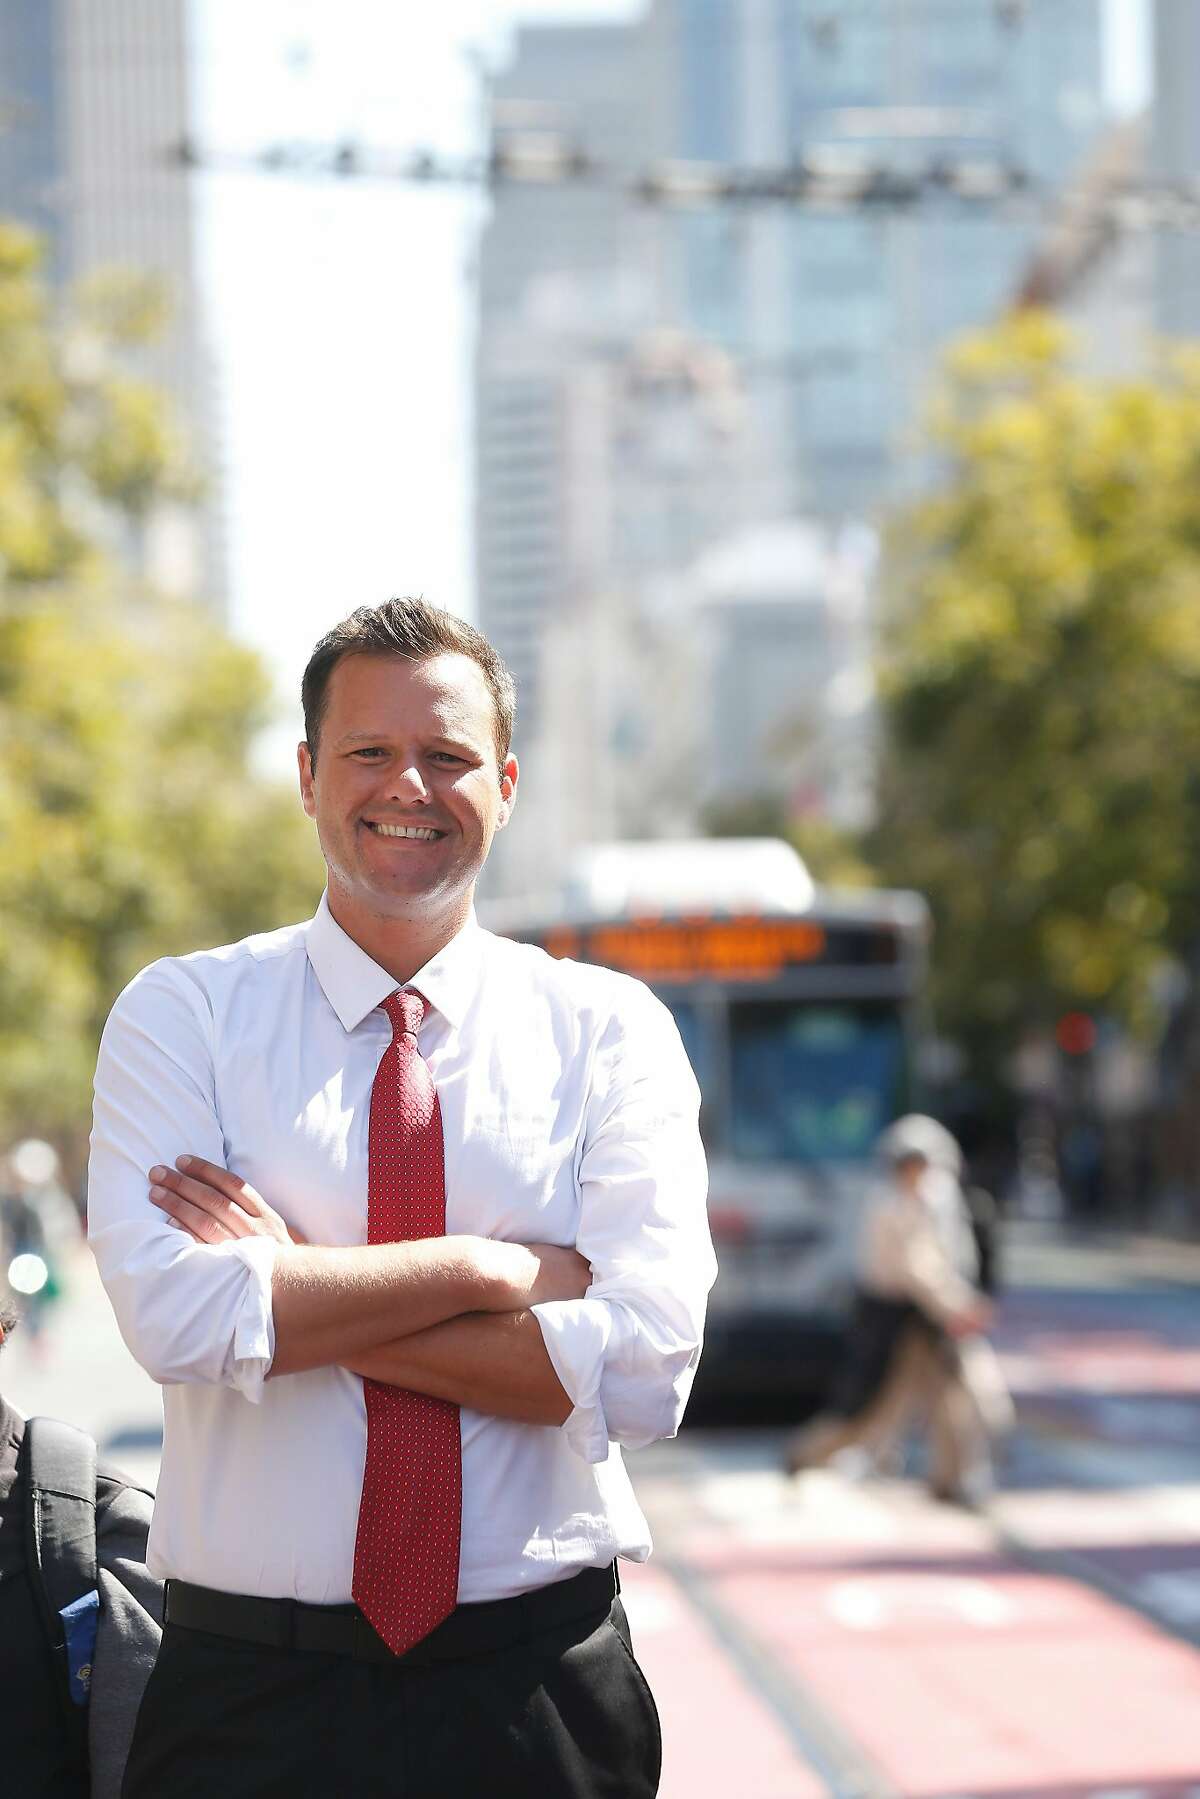 Matt Haney, San Francisco Board of Education commissioner and Dream Corps national policy director , stands on Market Street for a portrait on Monday, July 24, 2017 in San Francisco, Calif.